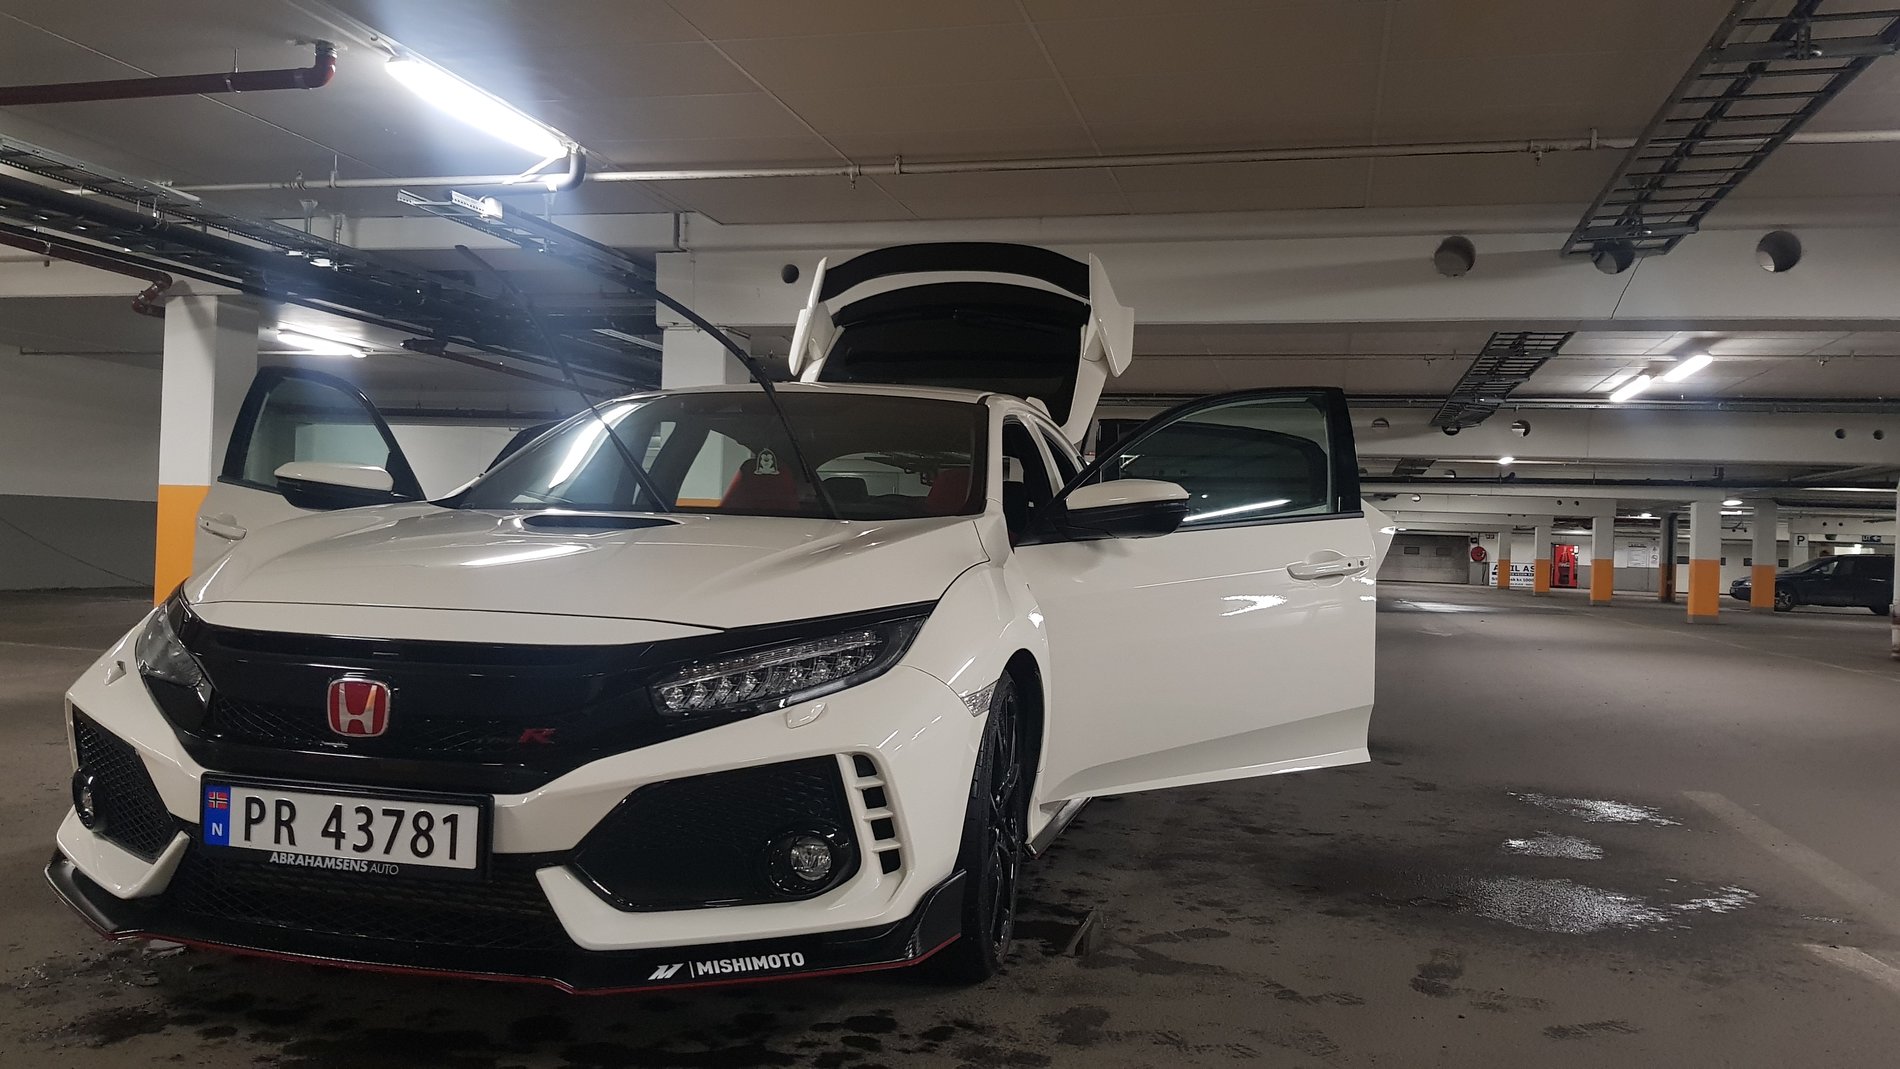 Honda Civic 10th gen Official Championship White Type R Picture Thread 20190501_191825